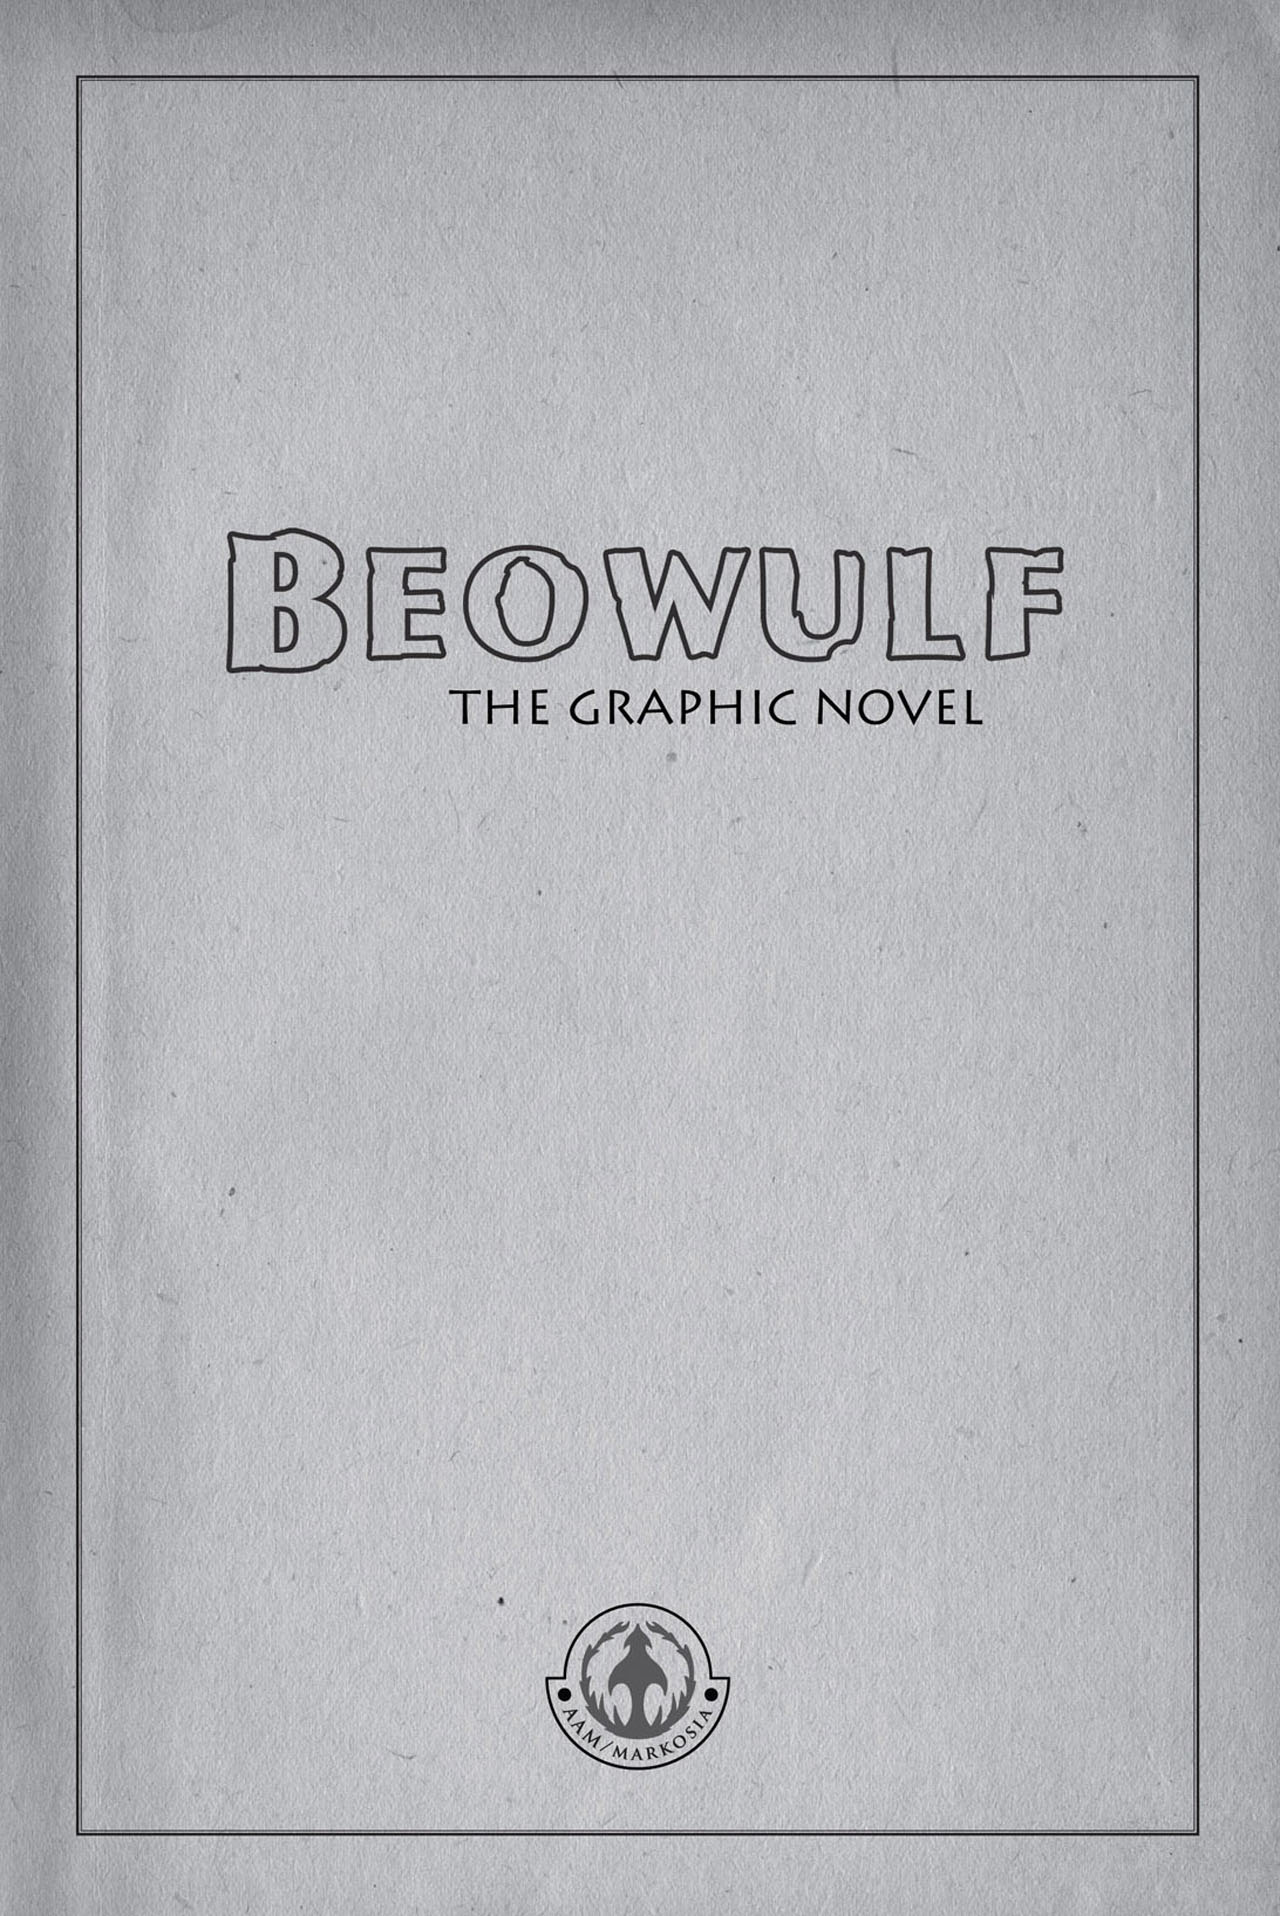 Read online Beowulf: The Graphic Novel comic -  Issue # Full - 2